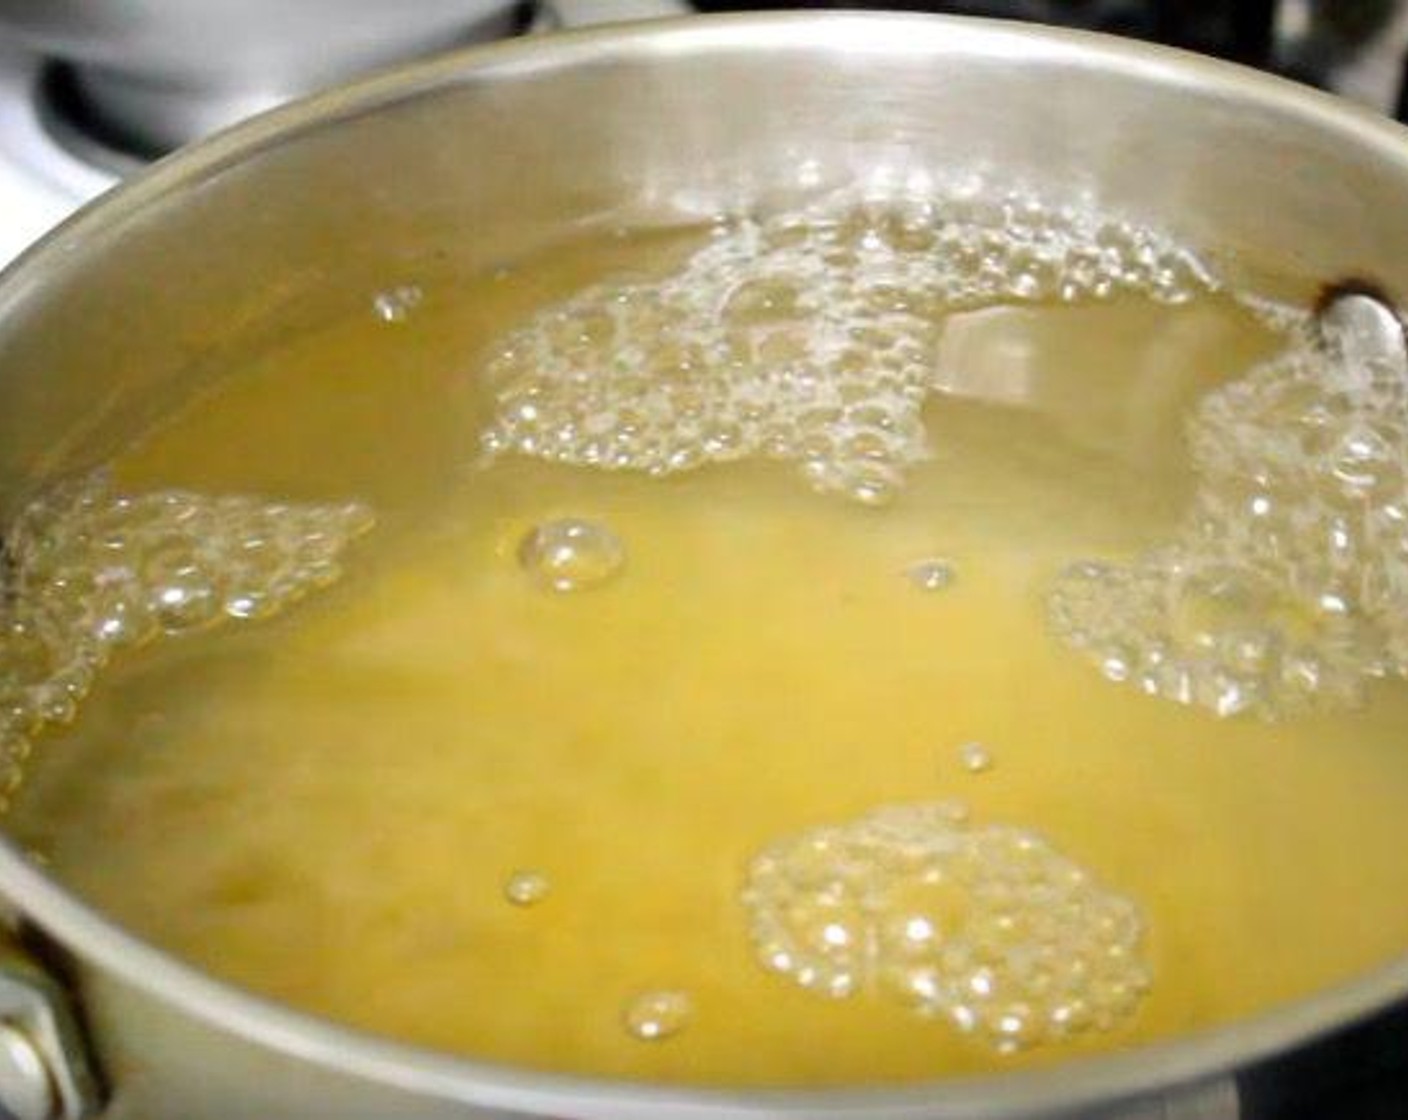 step 1 Bring a pot of salted water to a boil. Cook Elbow Macaroni (2 cups) according to package instructions. Drain and set aside.